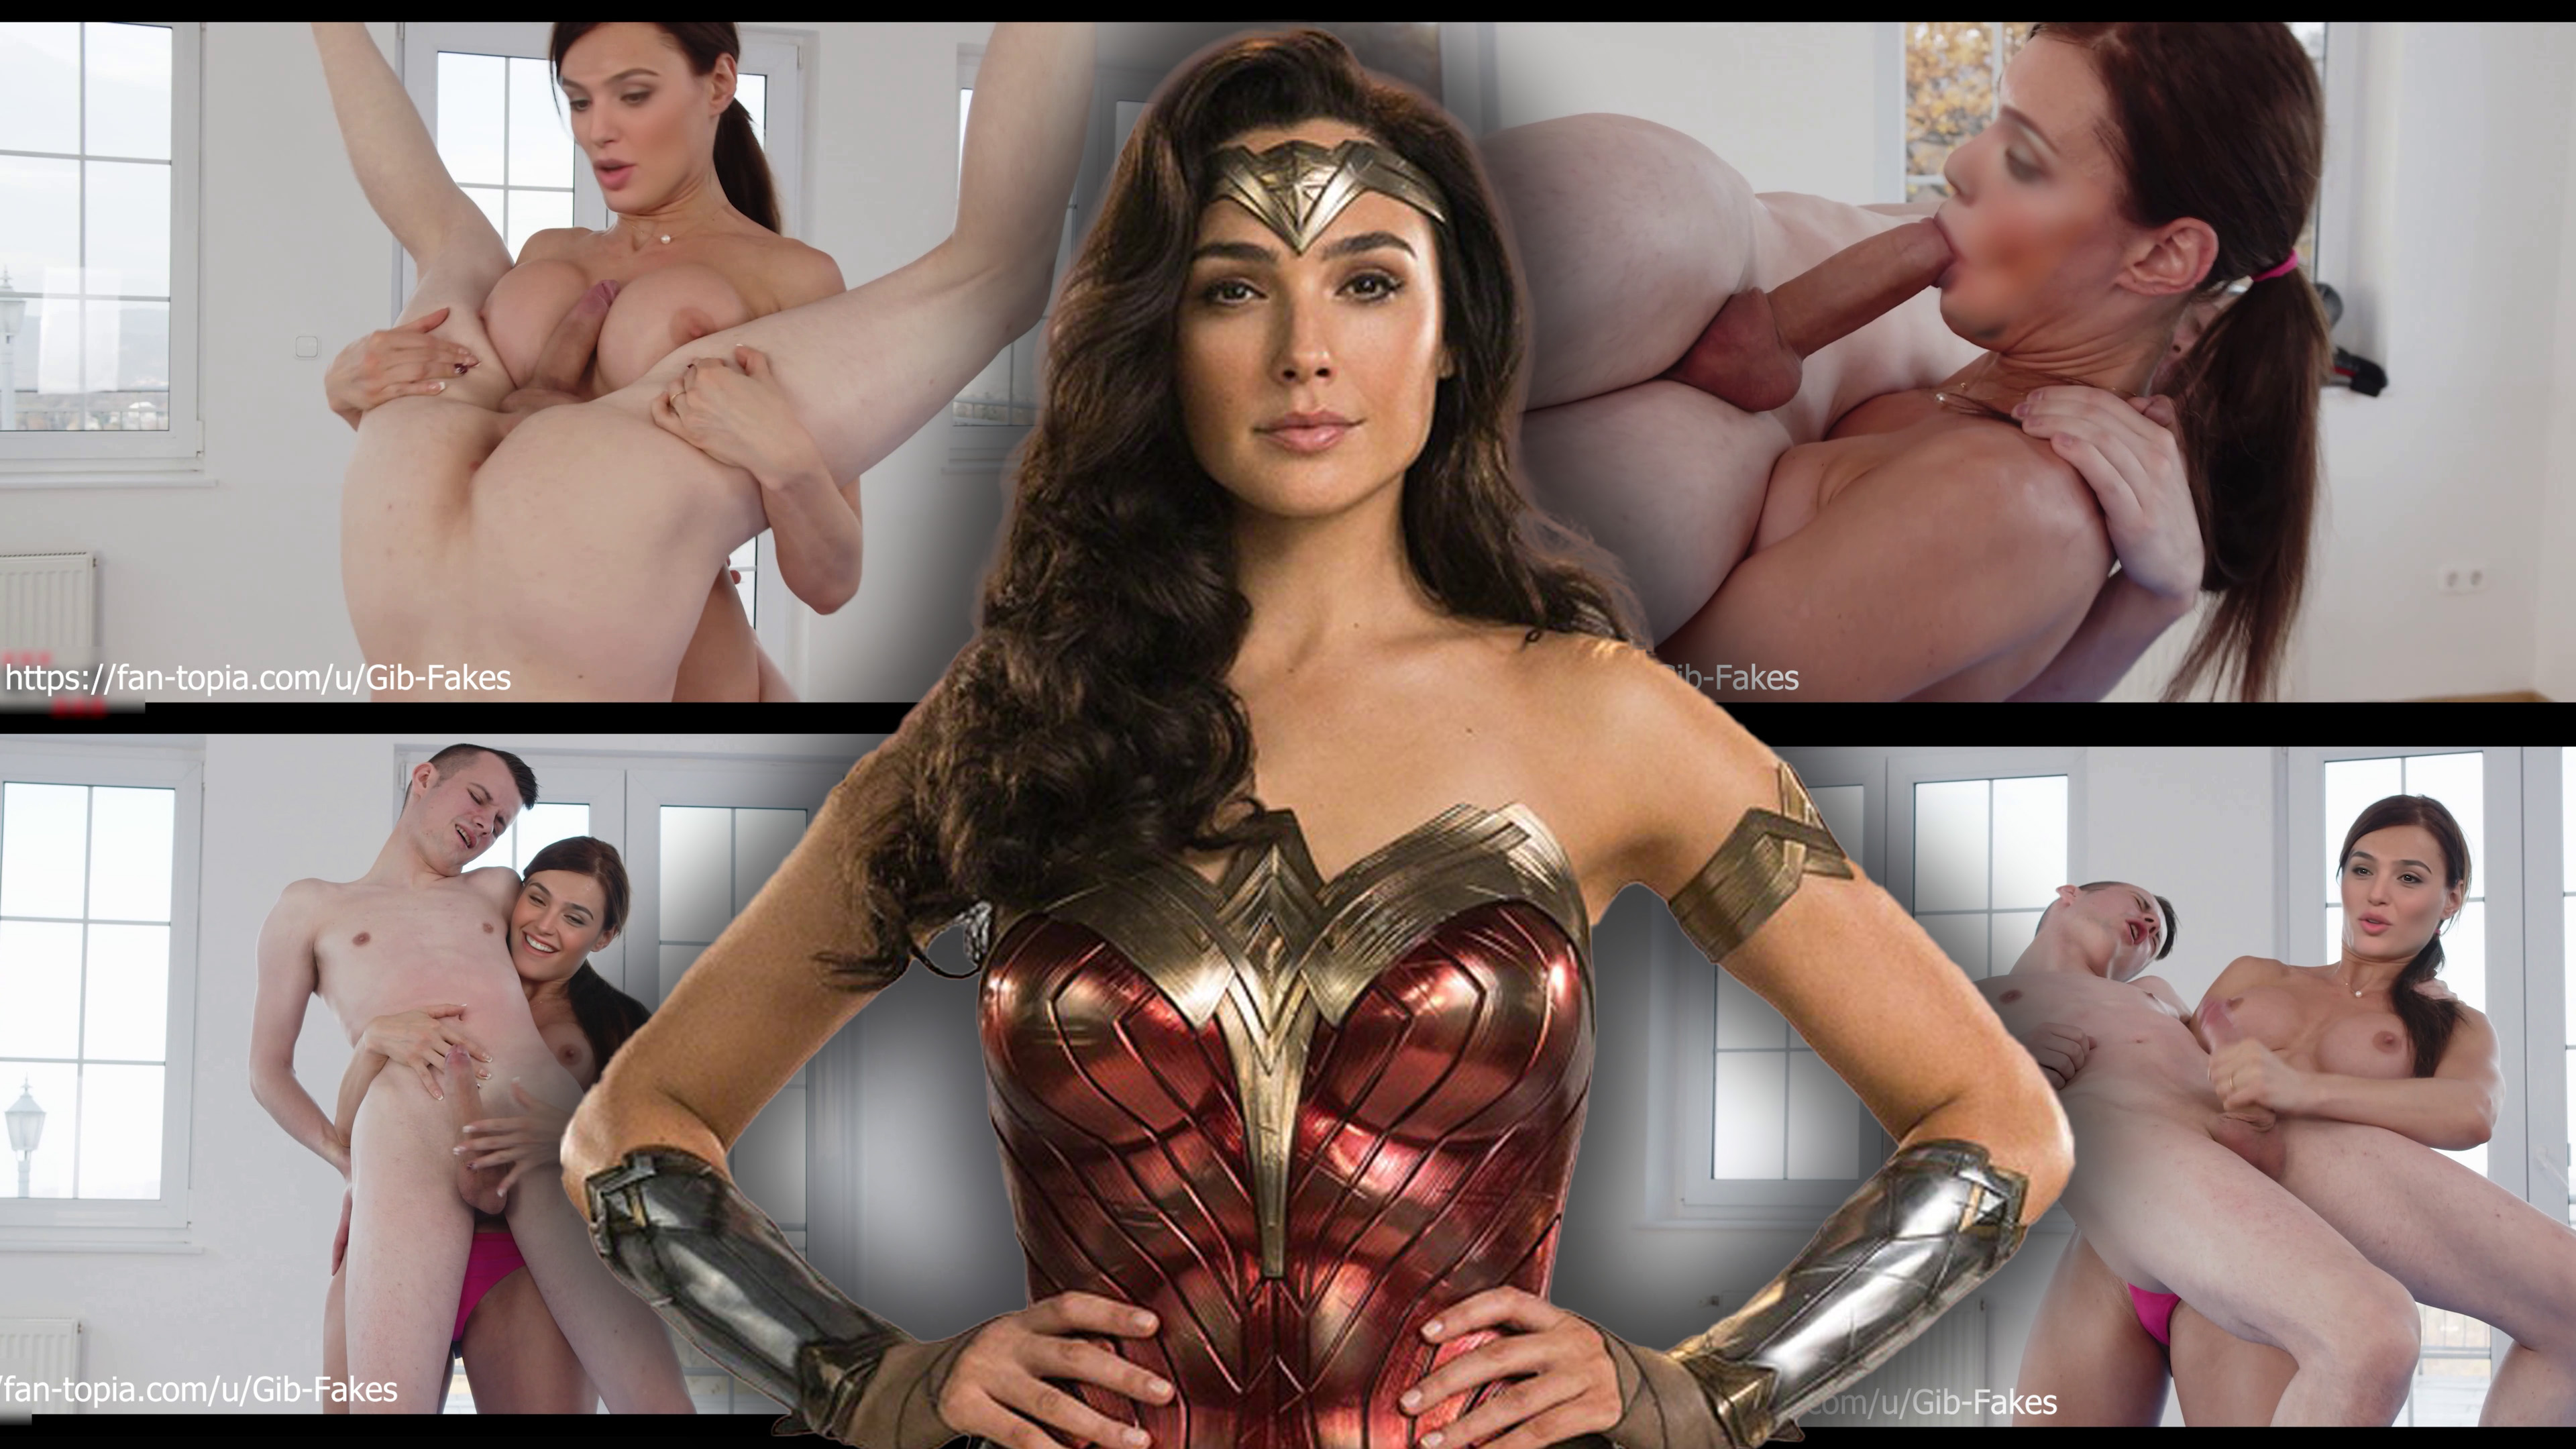 Gal Gadot - Wonder Woman Uses Her Amazonian Strength To Dominate A Guy